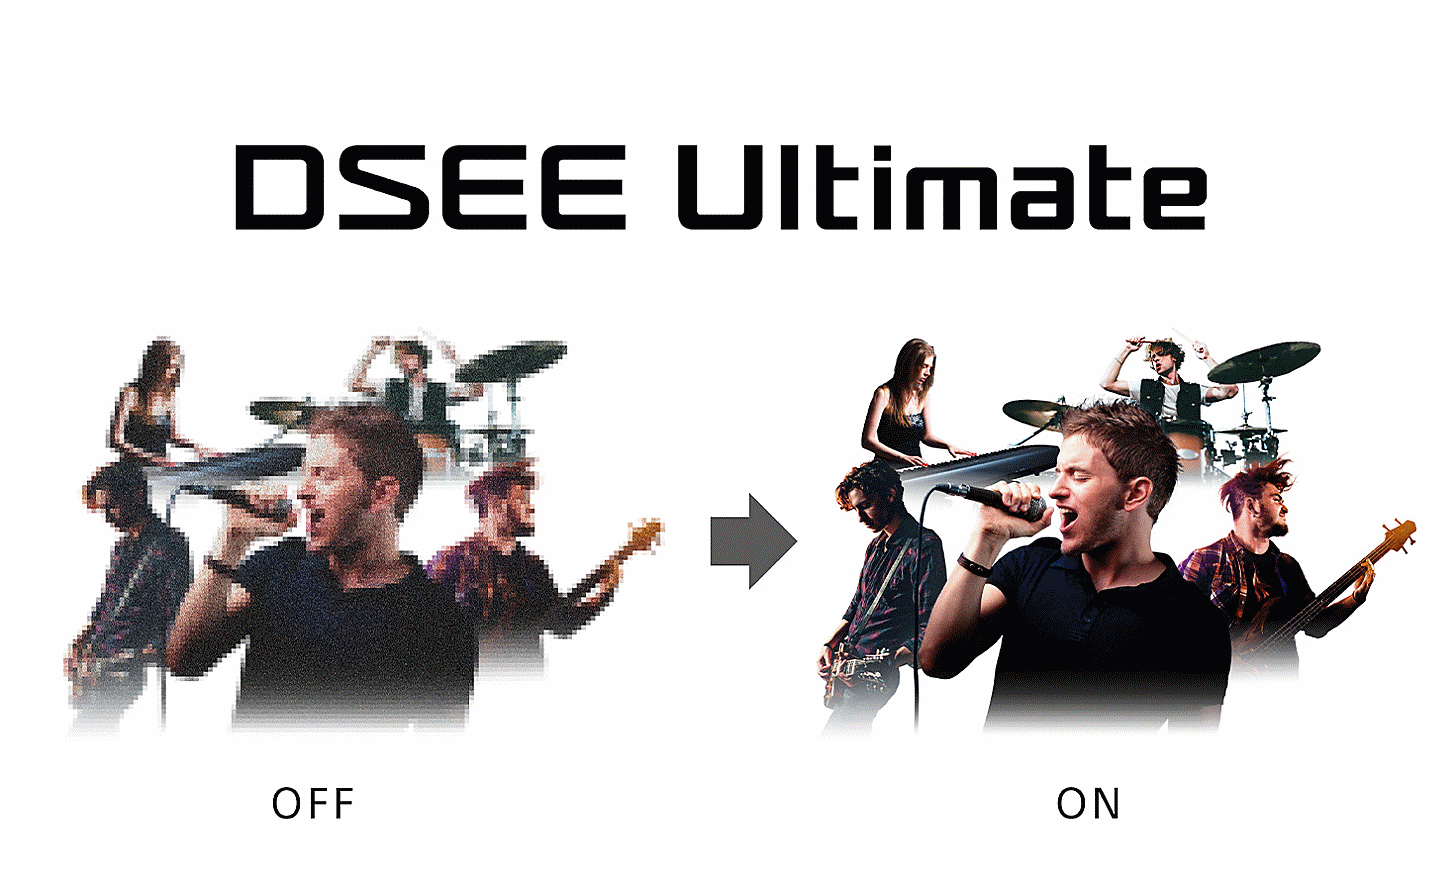 Two identical images of people playing instruments under the text DSEE Ultimate, the left is blurry and the right is clear